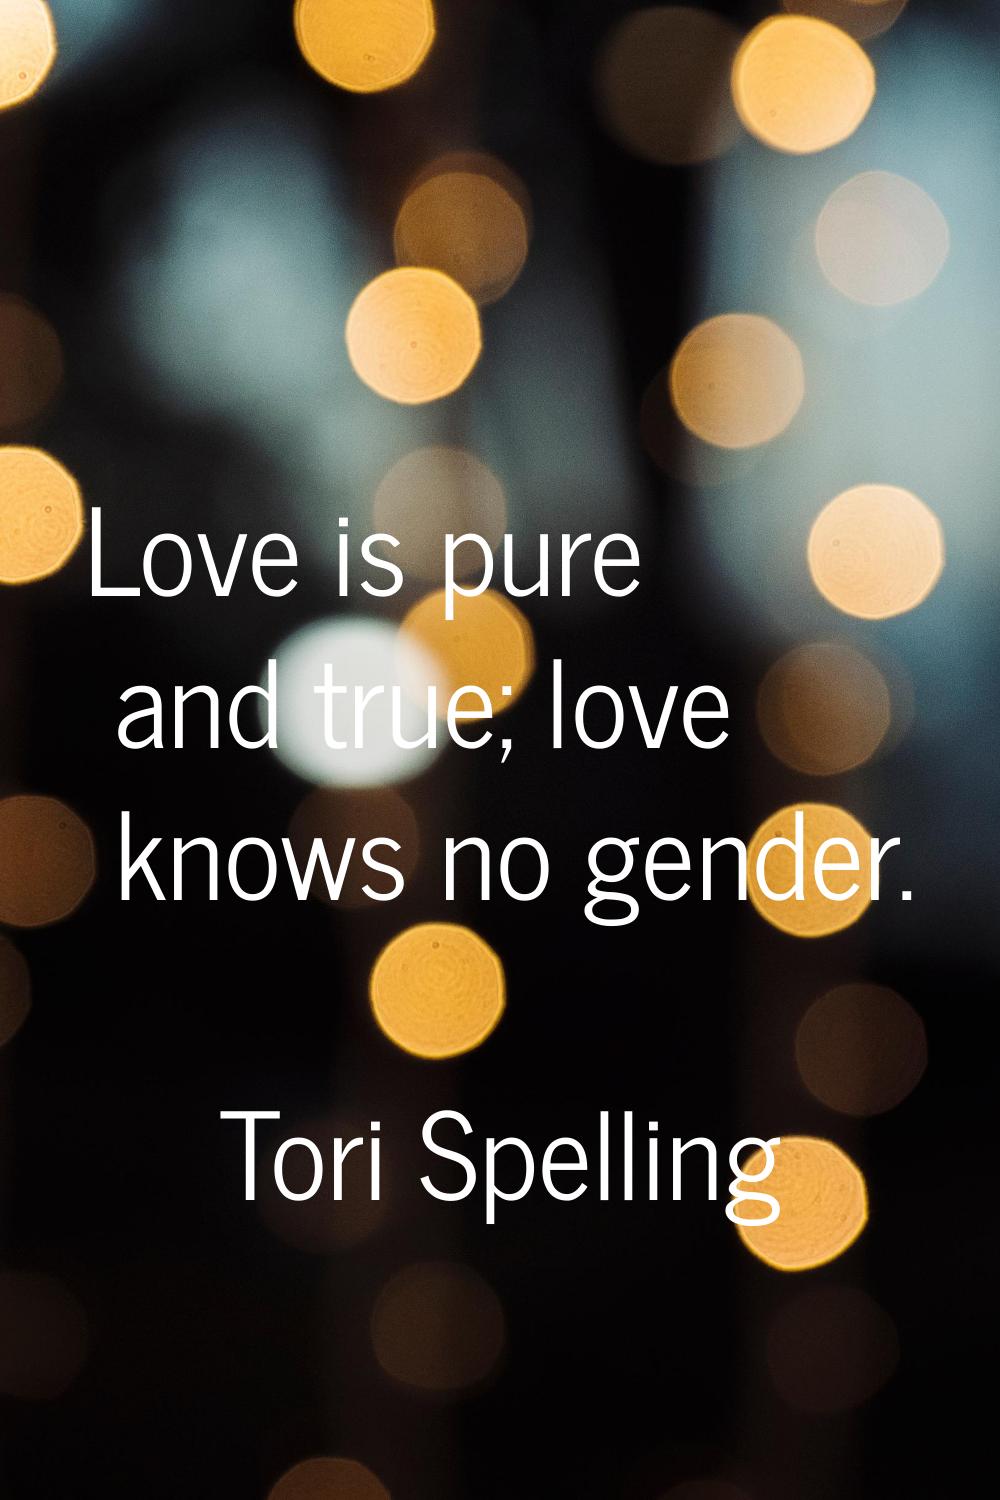 Love is pure and true; love knows no gender.